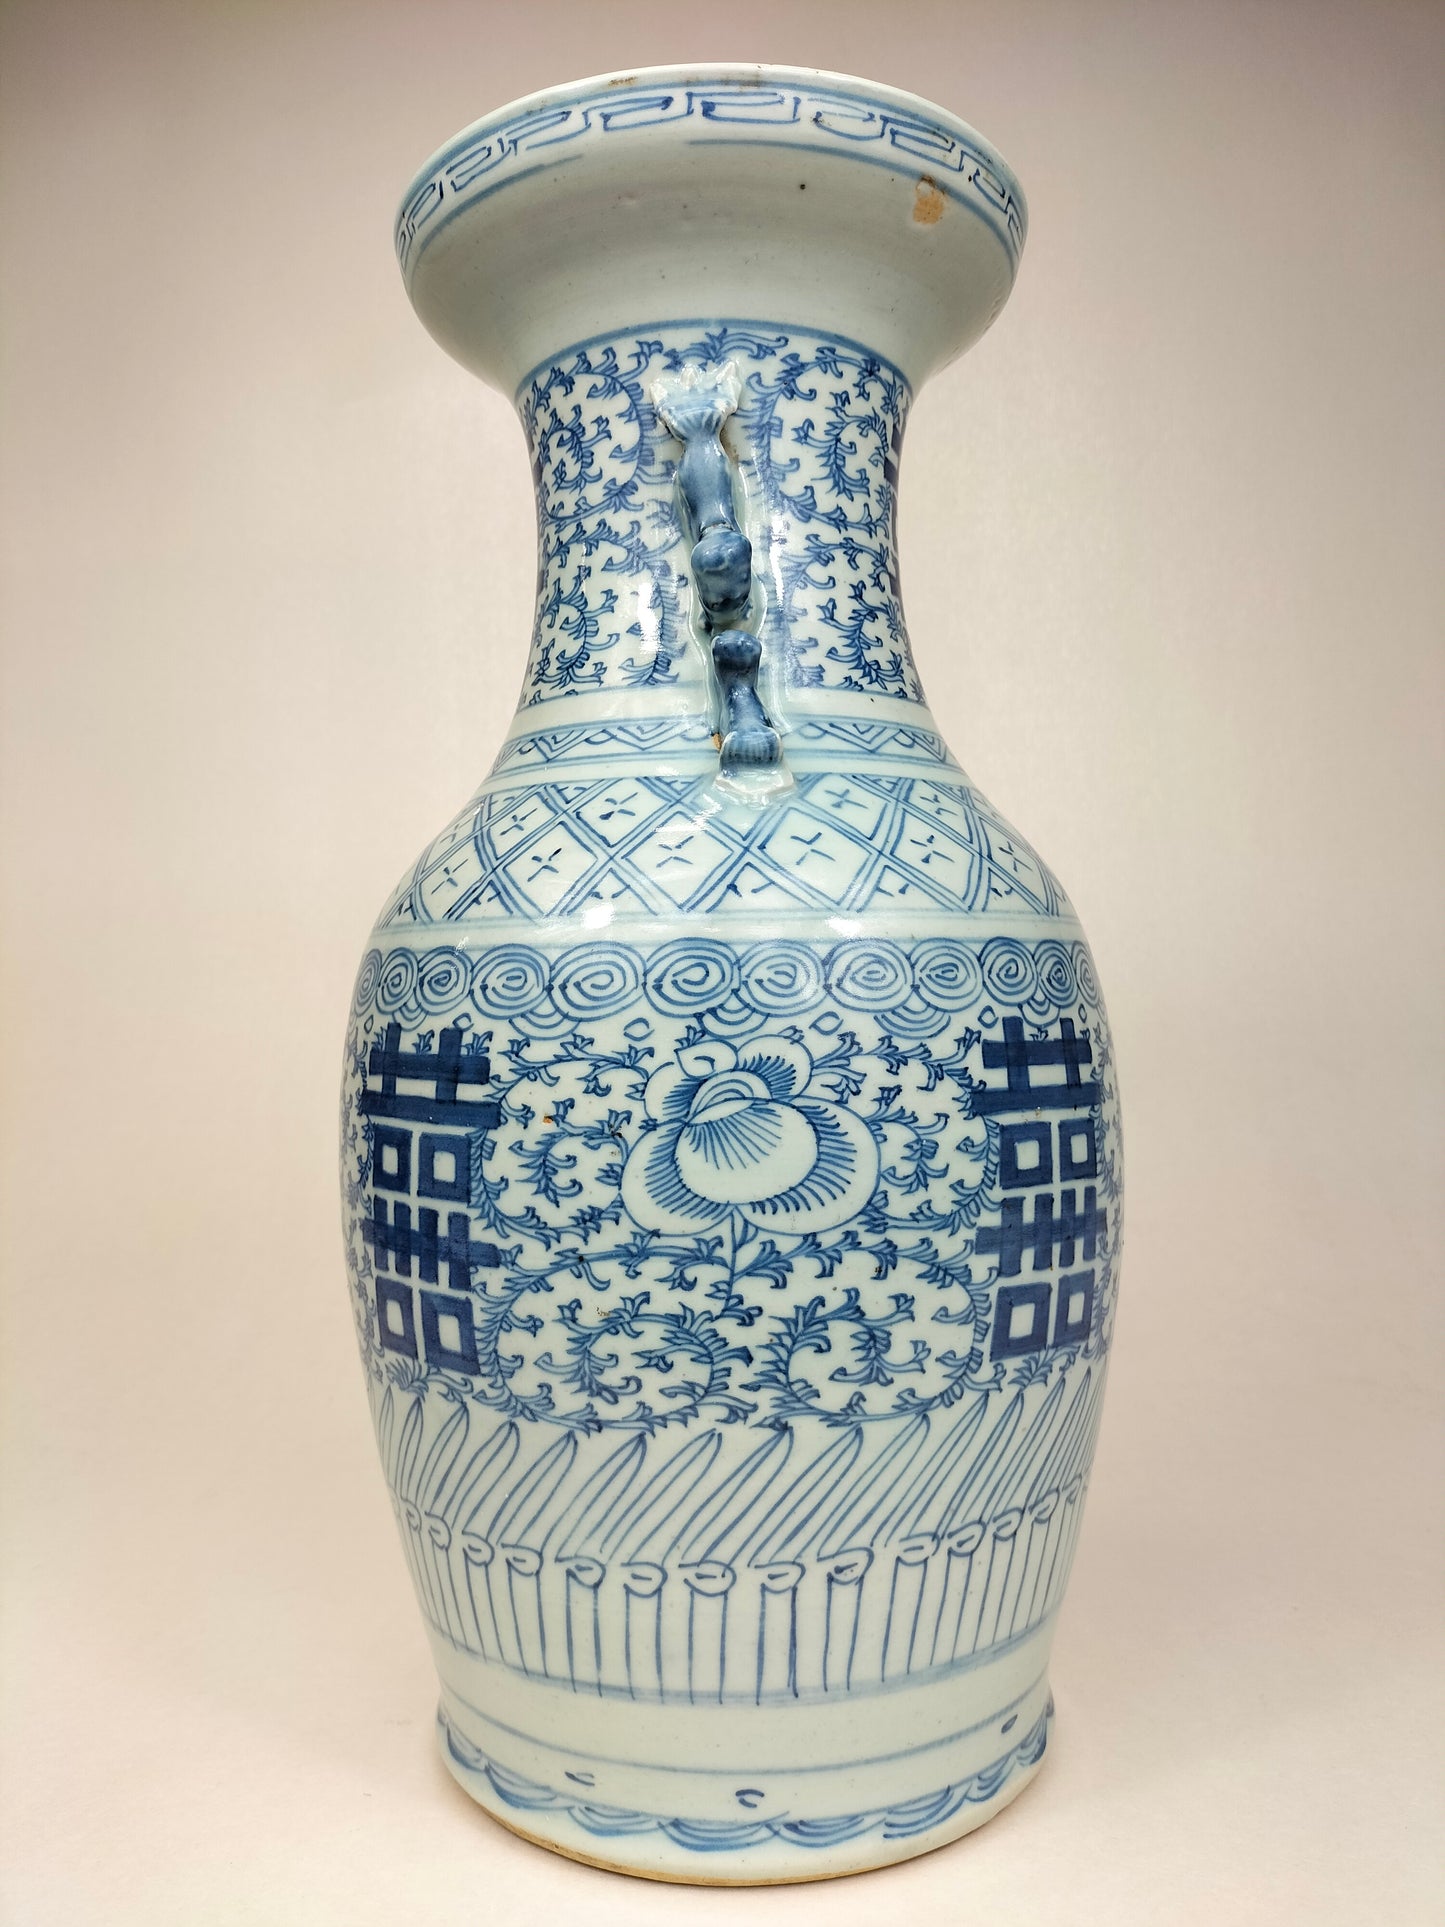 Antique Chinese double happiness vase // Qing Dynasty - 19th century